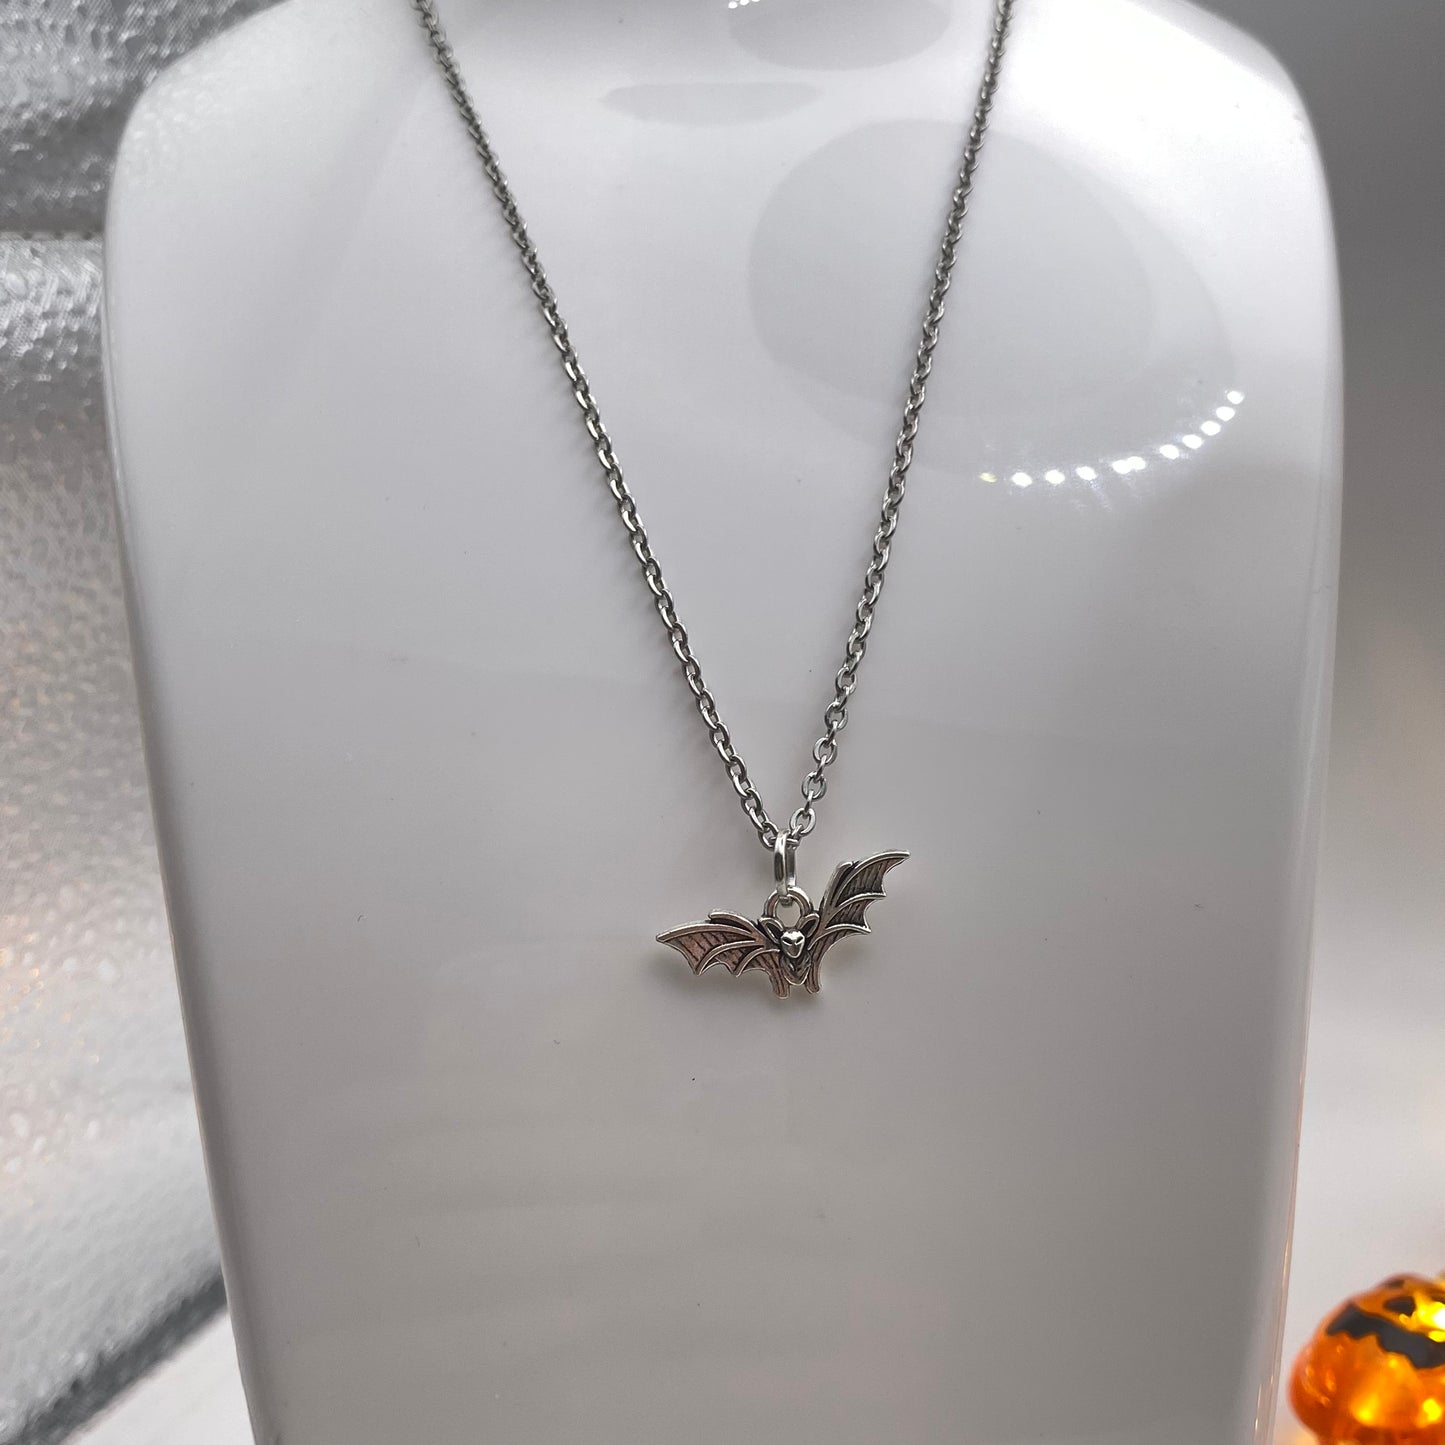 Small Bat Necklace